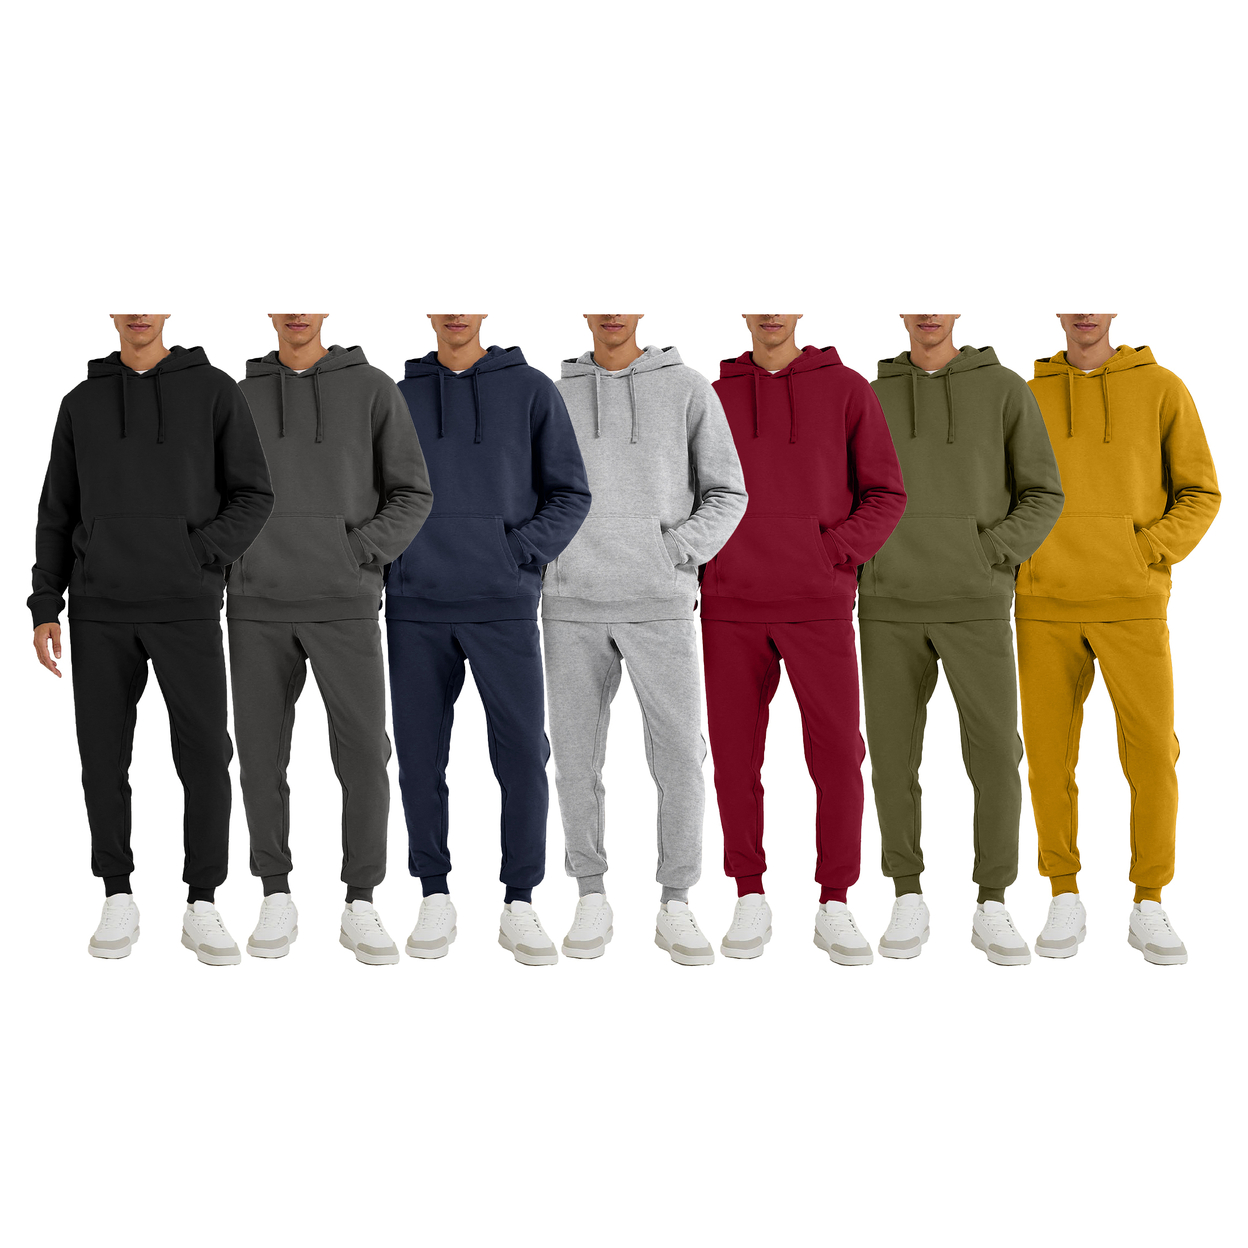 Multi-Pack: Men's Big & Tall Athletic Active Jogging Winter Warm Fleece Lined Pullover Tracksuit Set - Charcoal, 1-pack, Small